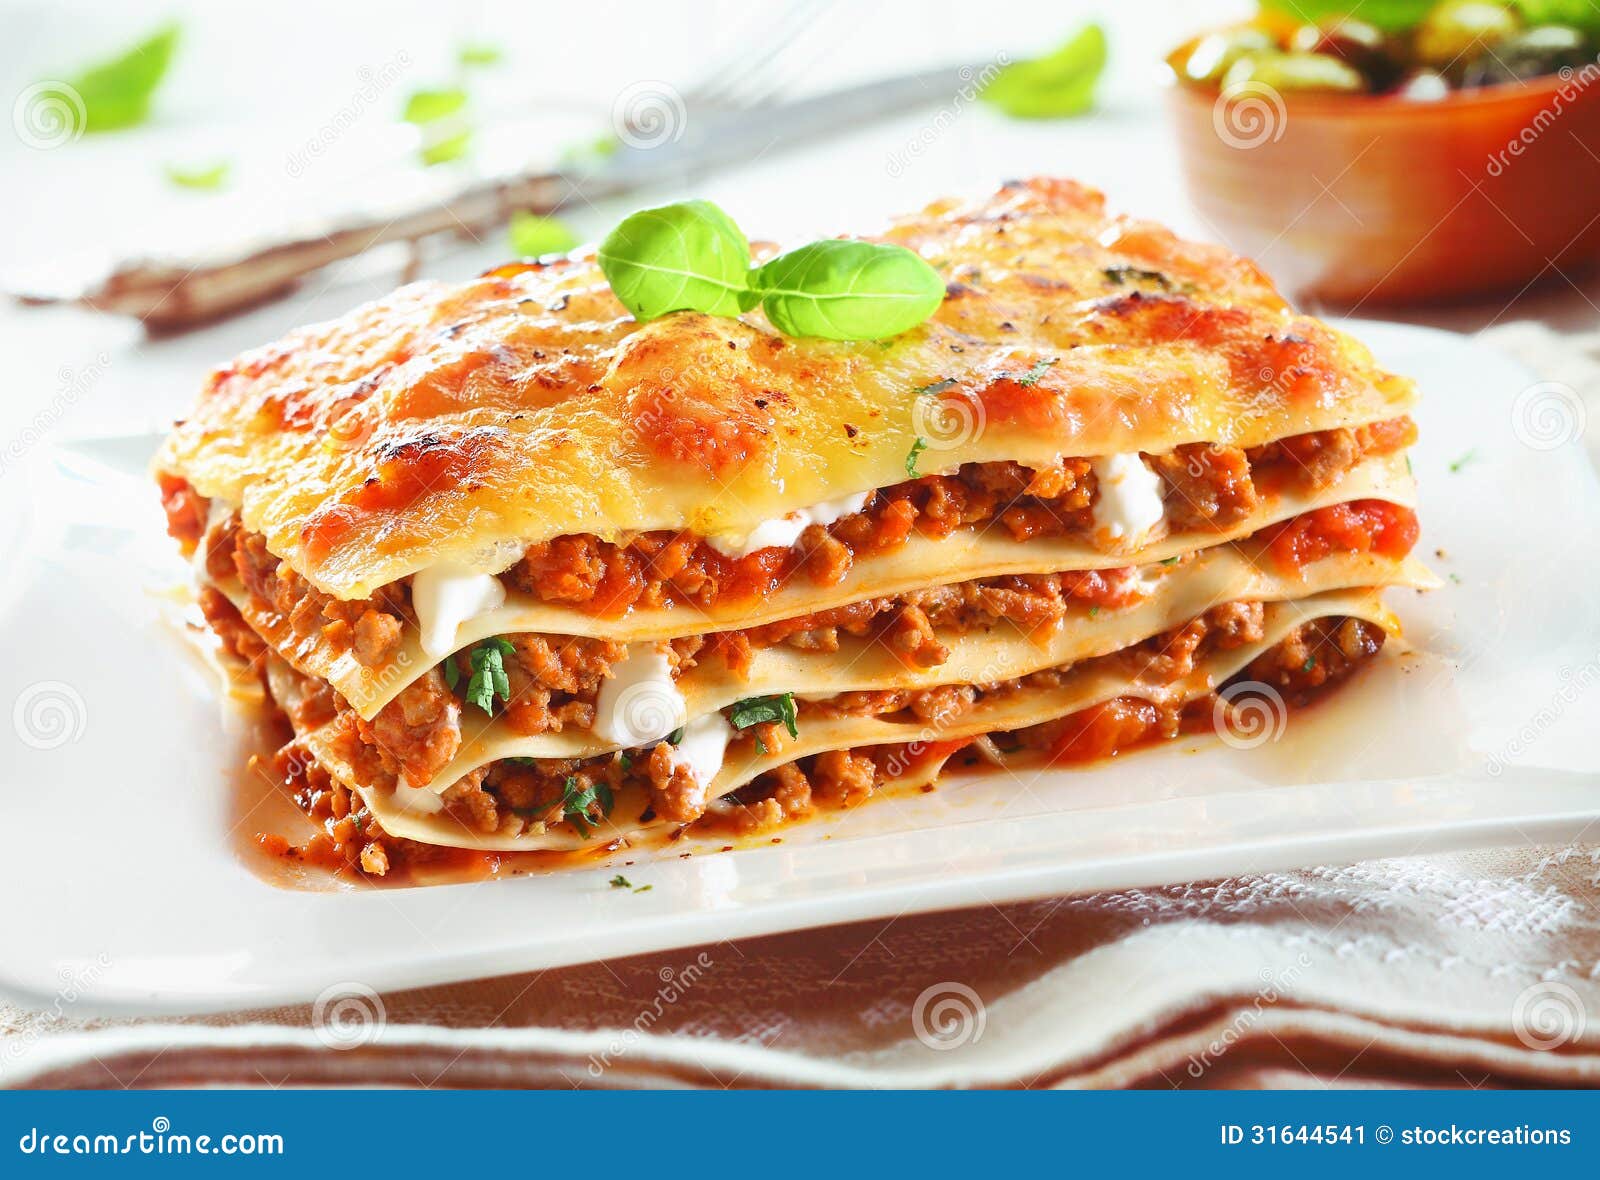 Traditional Lasagna with Bolognese Sauce Stock Image - Image of menu ...